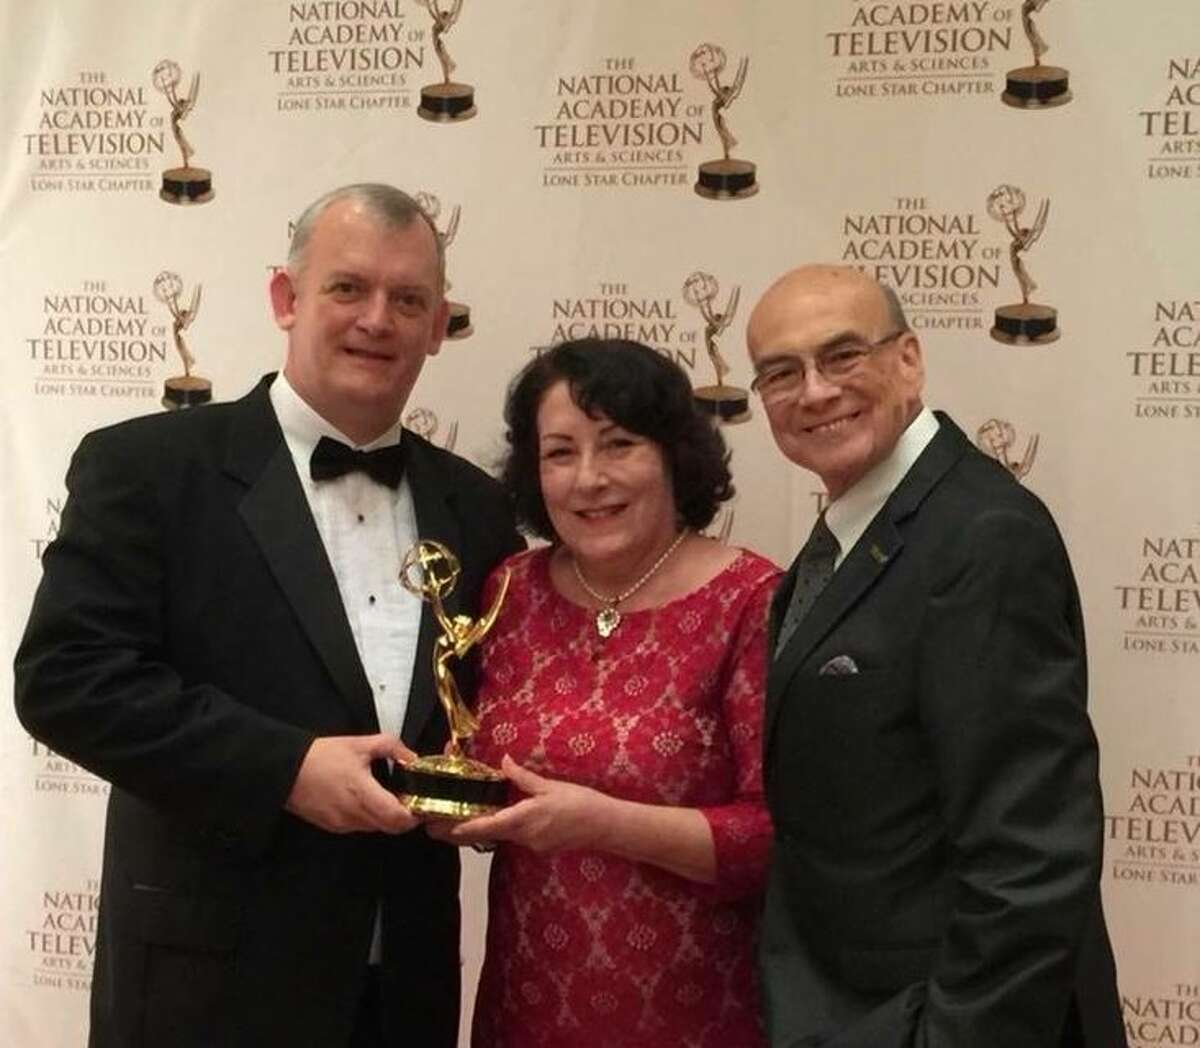 ‘Rhapsody on the Rio Grande” has been awarded the Lone Star Chapter Regional Emmy in the “Documentary-Topical” Category, from among eight nominees. Left to right are Texas A&M International University’s Dr. Colin Campbell, composer for the documentary’s score; Rosanne Palacios, TAMIU vice president for Institutional Advancement, and Arthur Emerson, president and CEO of KLRN which produced the film, in partnership with TAMIU, along with generous funding from the City of Laredo. 